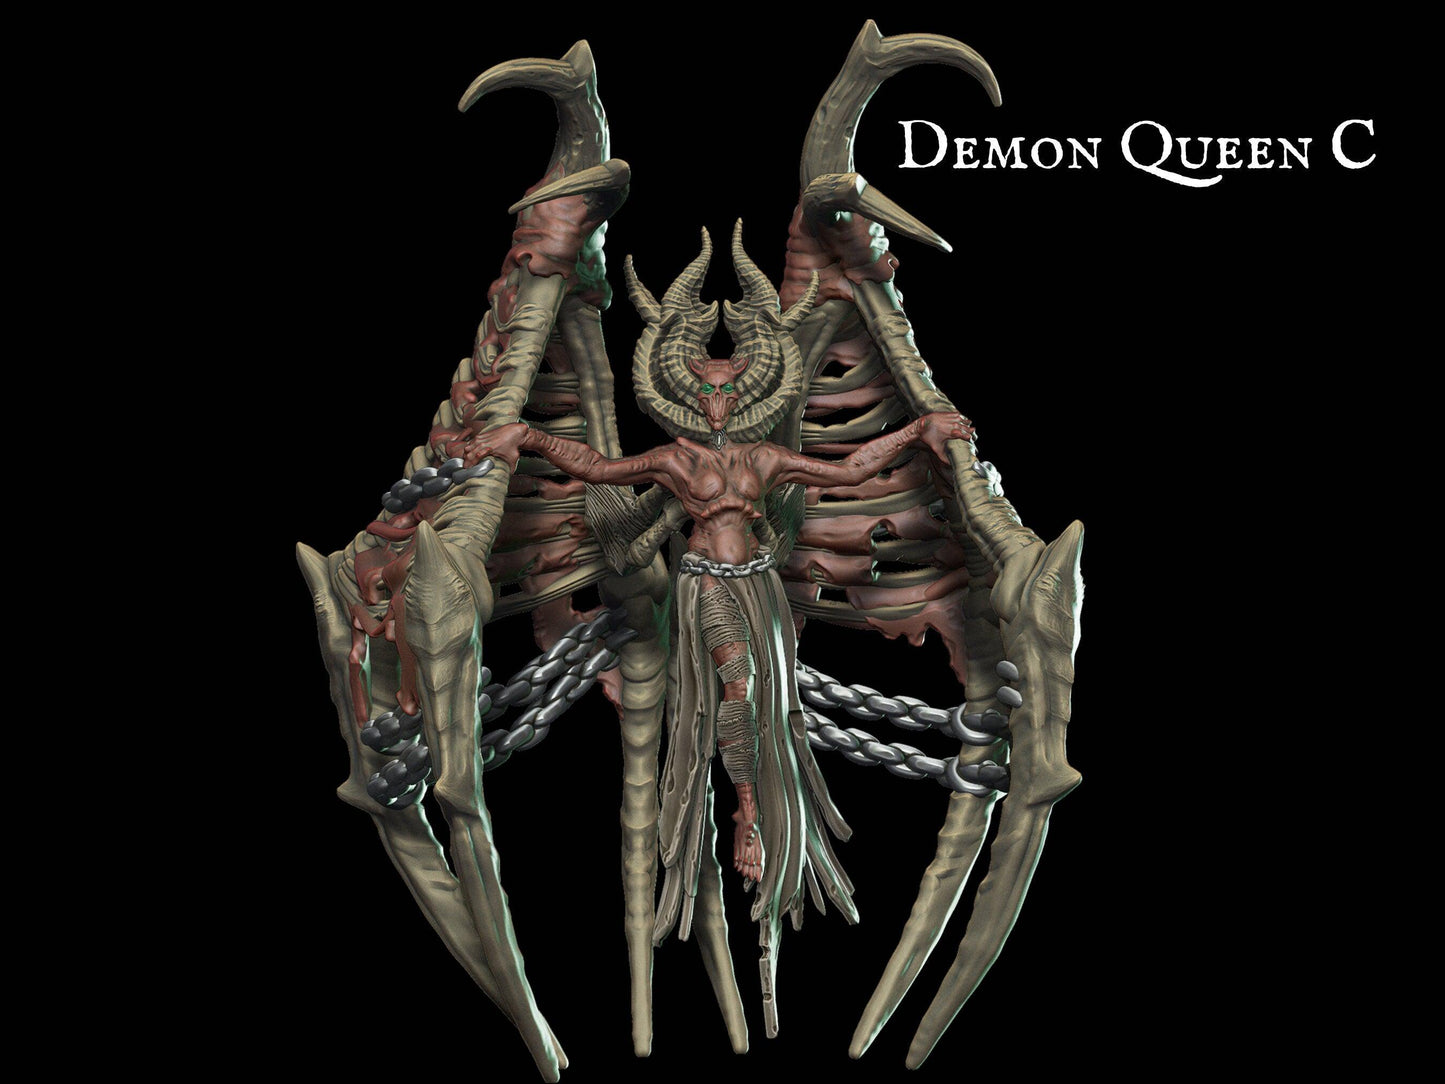 Demon Queen Miniature 28mm scale Tabletop gaming DnD Miniature Dungeons and Dragons, dnd 5e dungeon master gift demon miniature - Plague Miniatures shop for DnD Miniatures